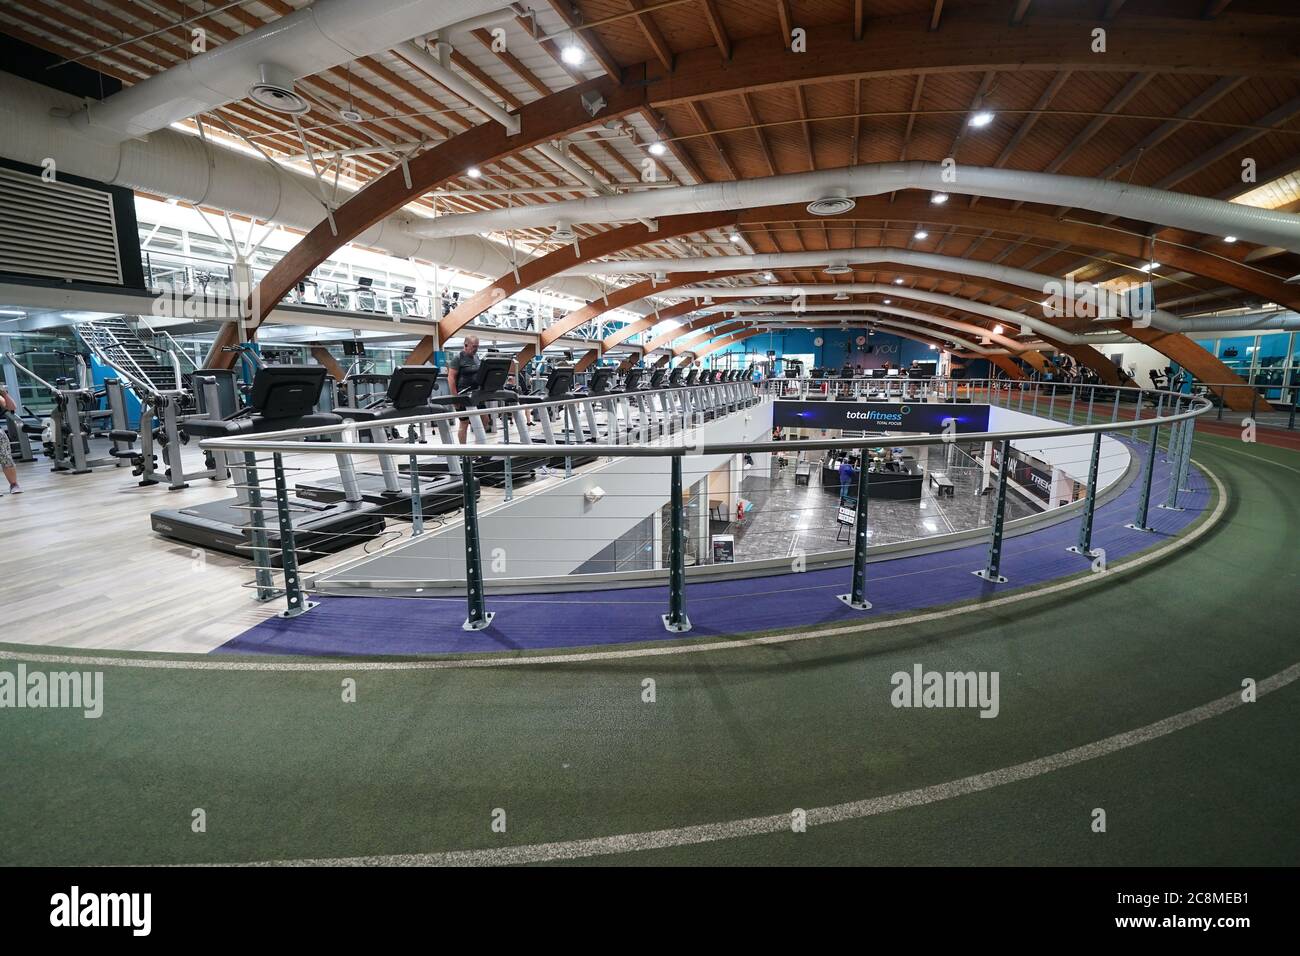 Manchester, Britain. 25th July, 2020. People work out at a gym in Manchester, Britain, on July 25, 2020. According to the British government's guidance, indoor gyms, swimming pools and sports facilities could reopen from July 25. Credit: Jon Super/Xinhua/Alamy Live News Stock Photo